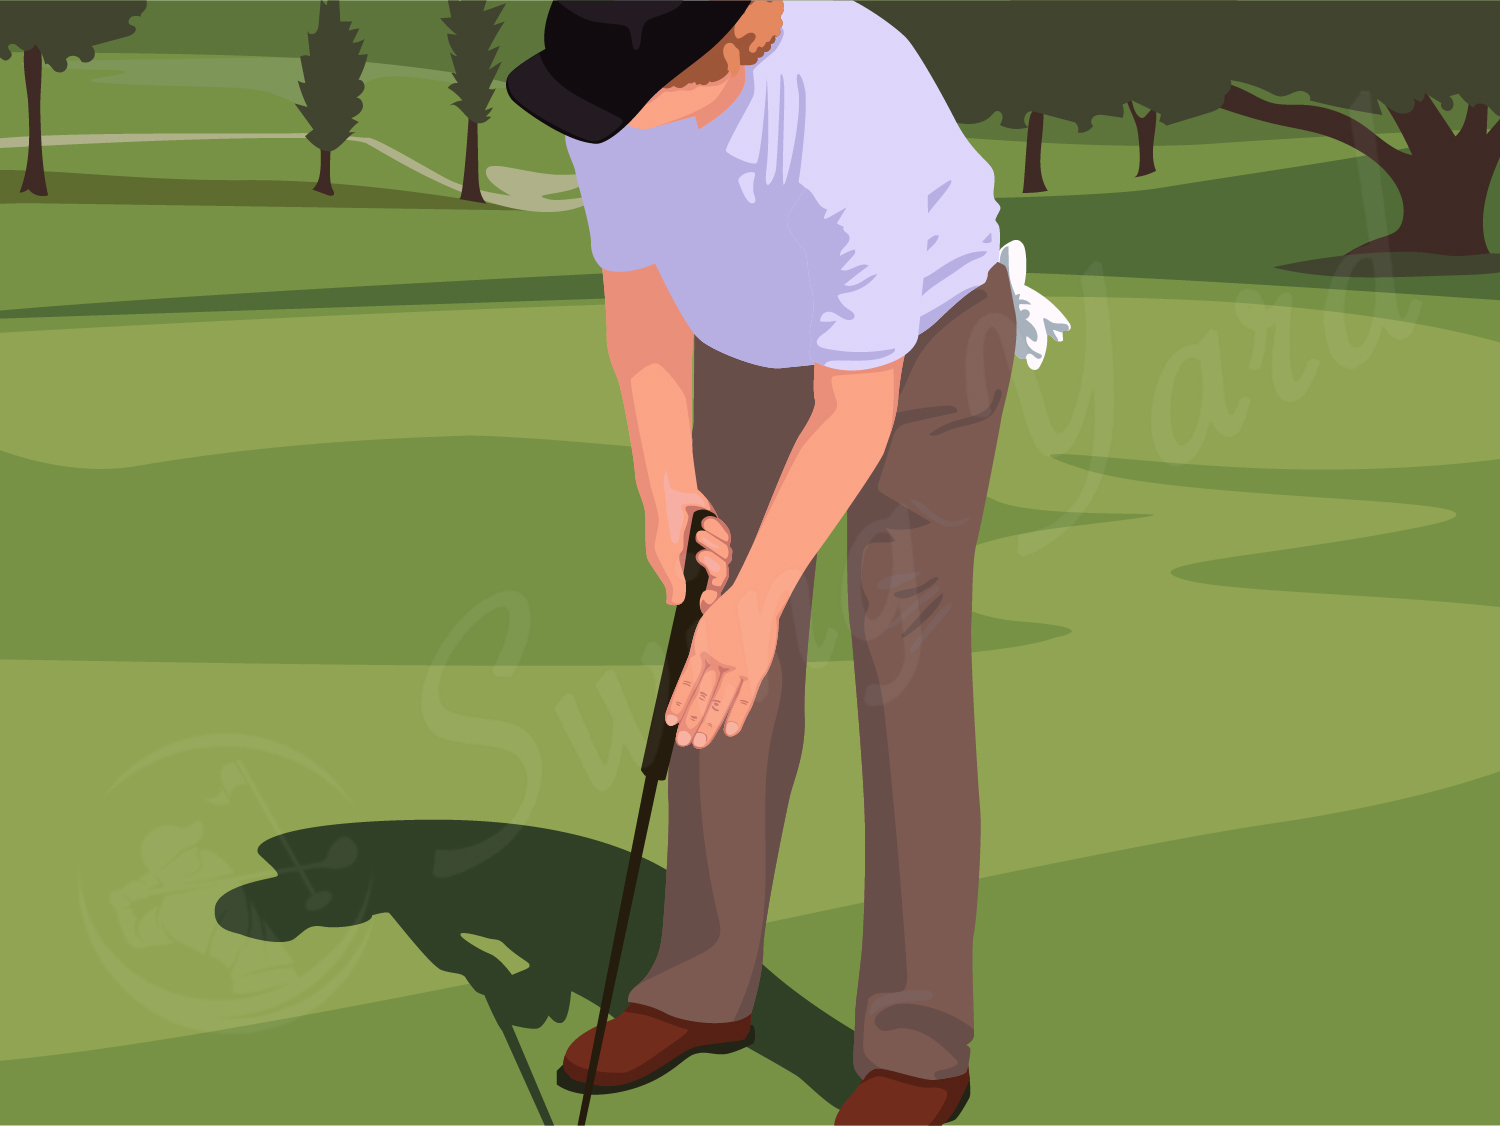 Left handed claw putting grip